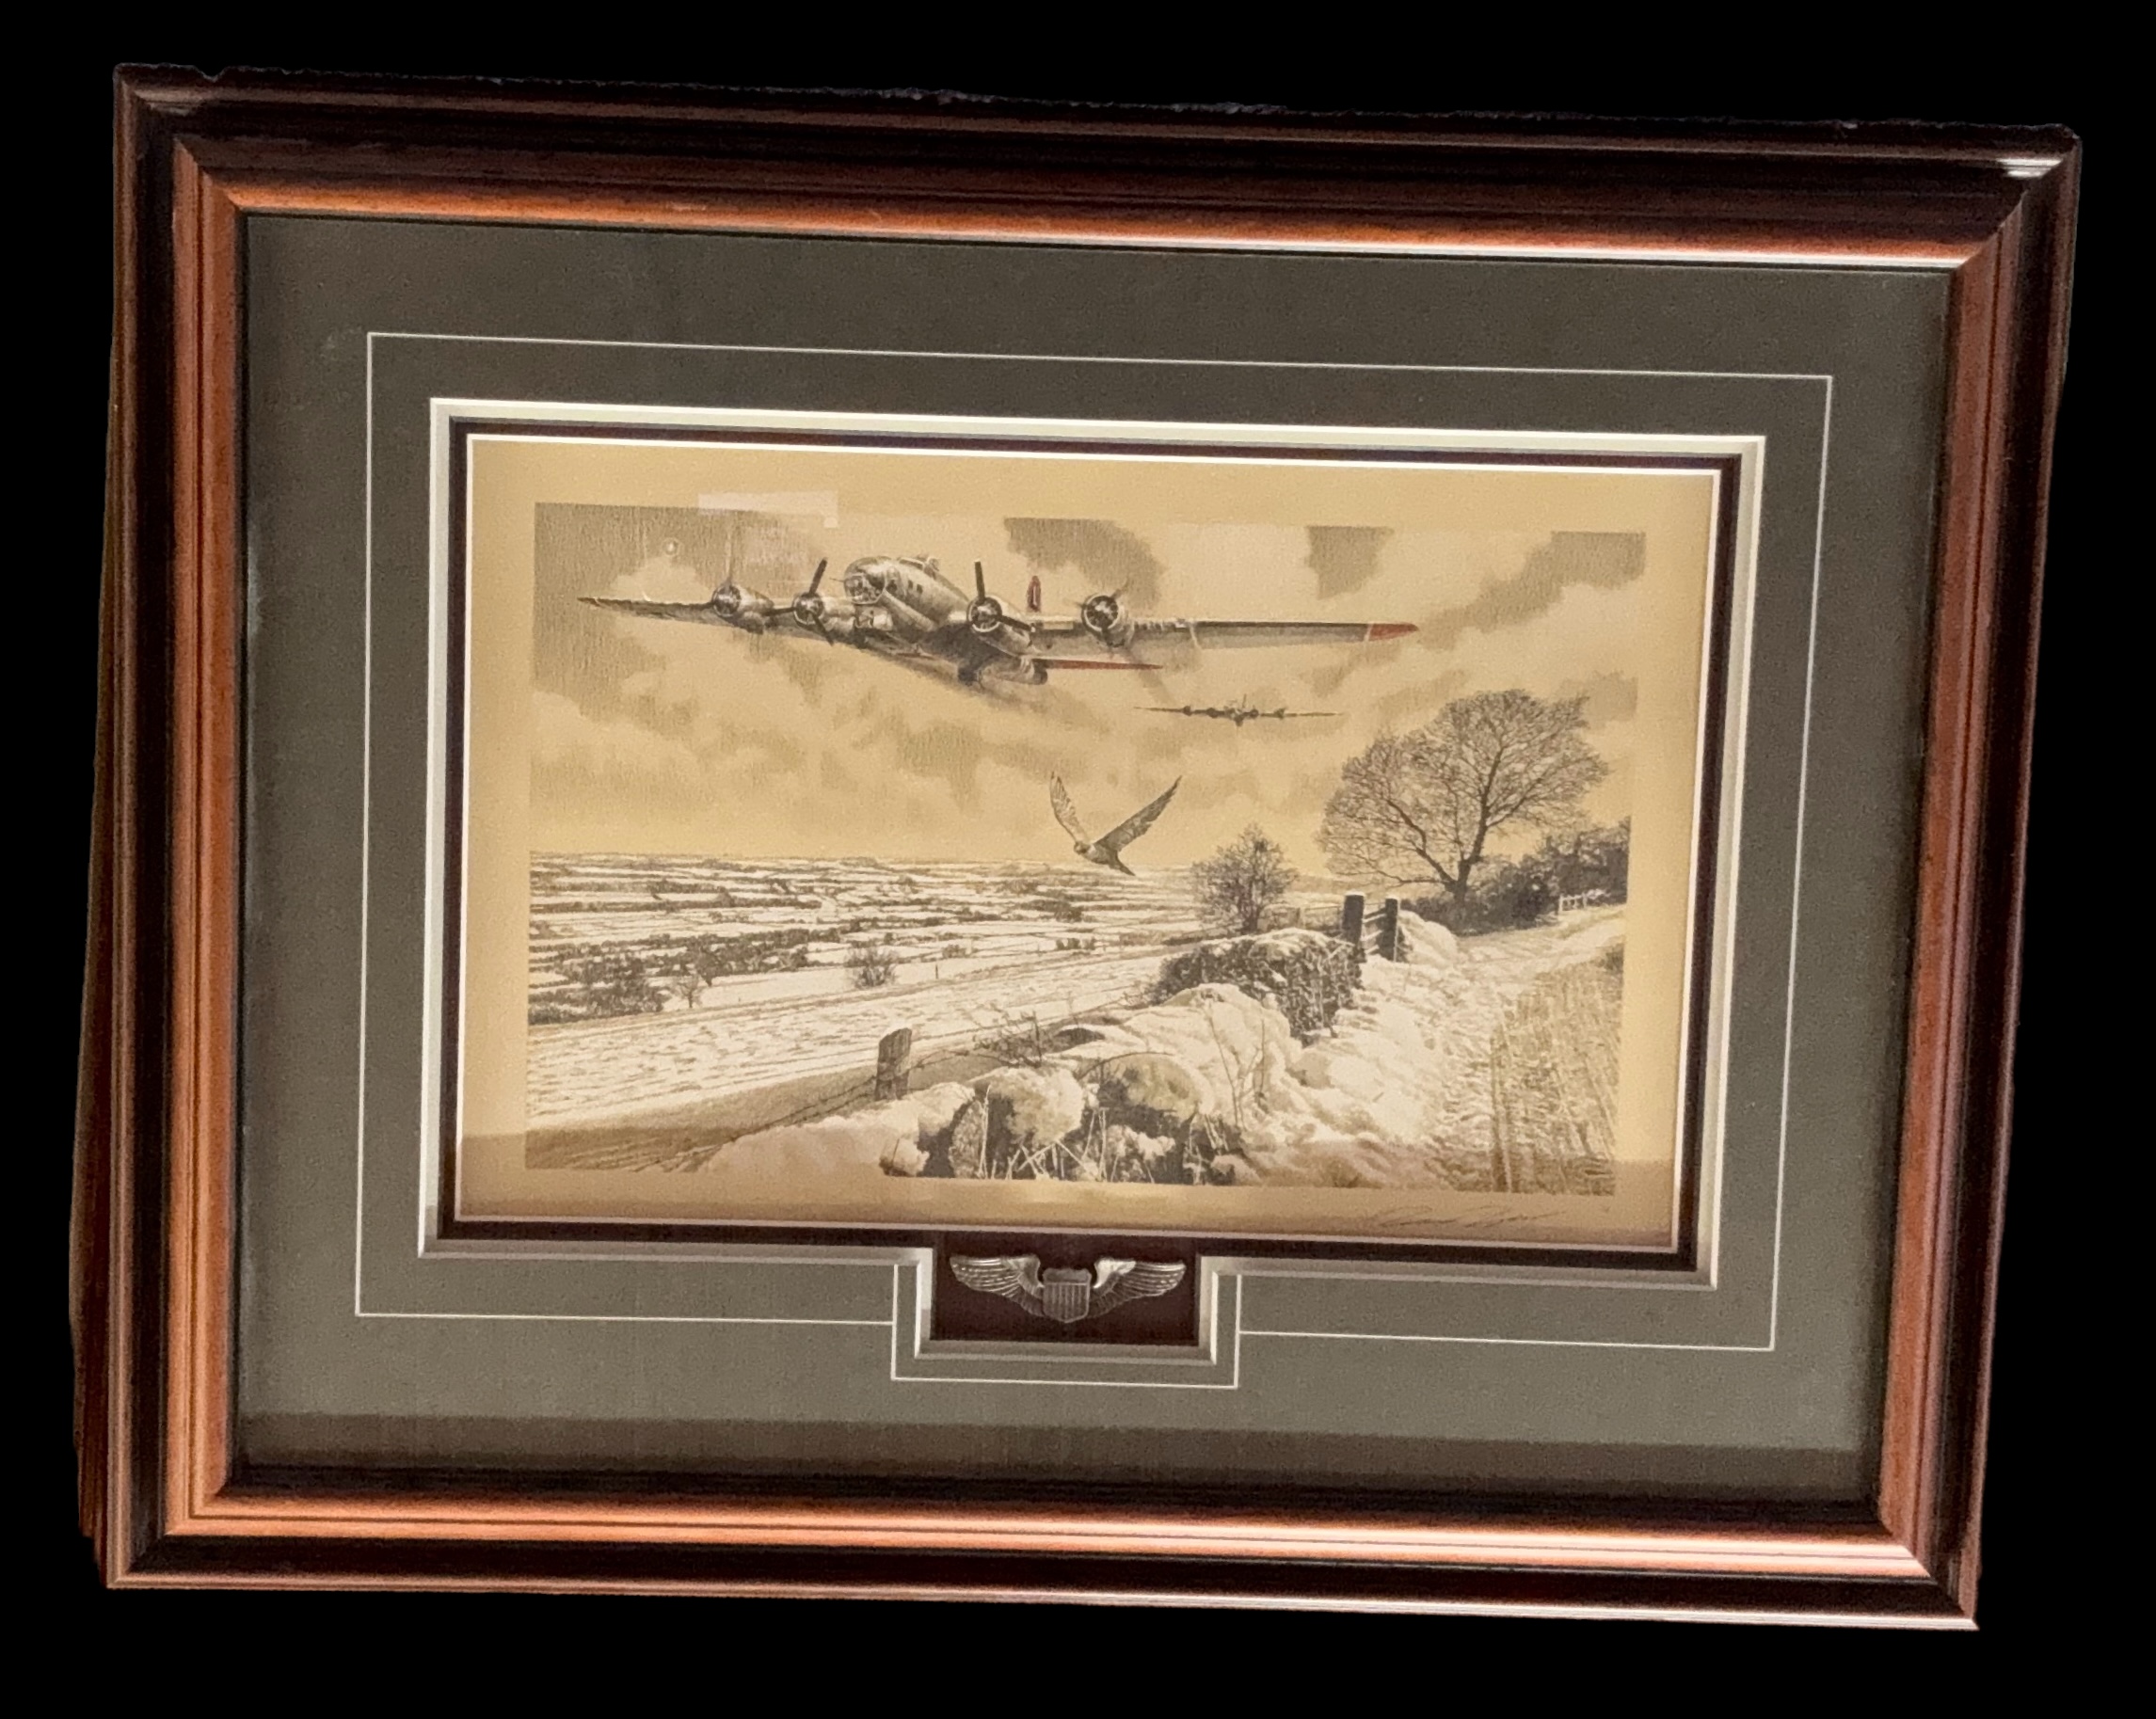 WW2 Print by artist Robert Taylor Limited. Picturing WW2 plane flying over a field, USAF wings